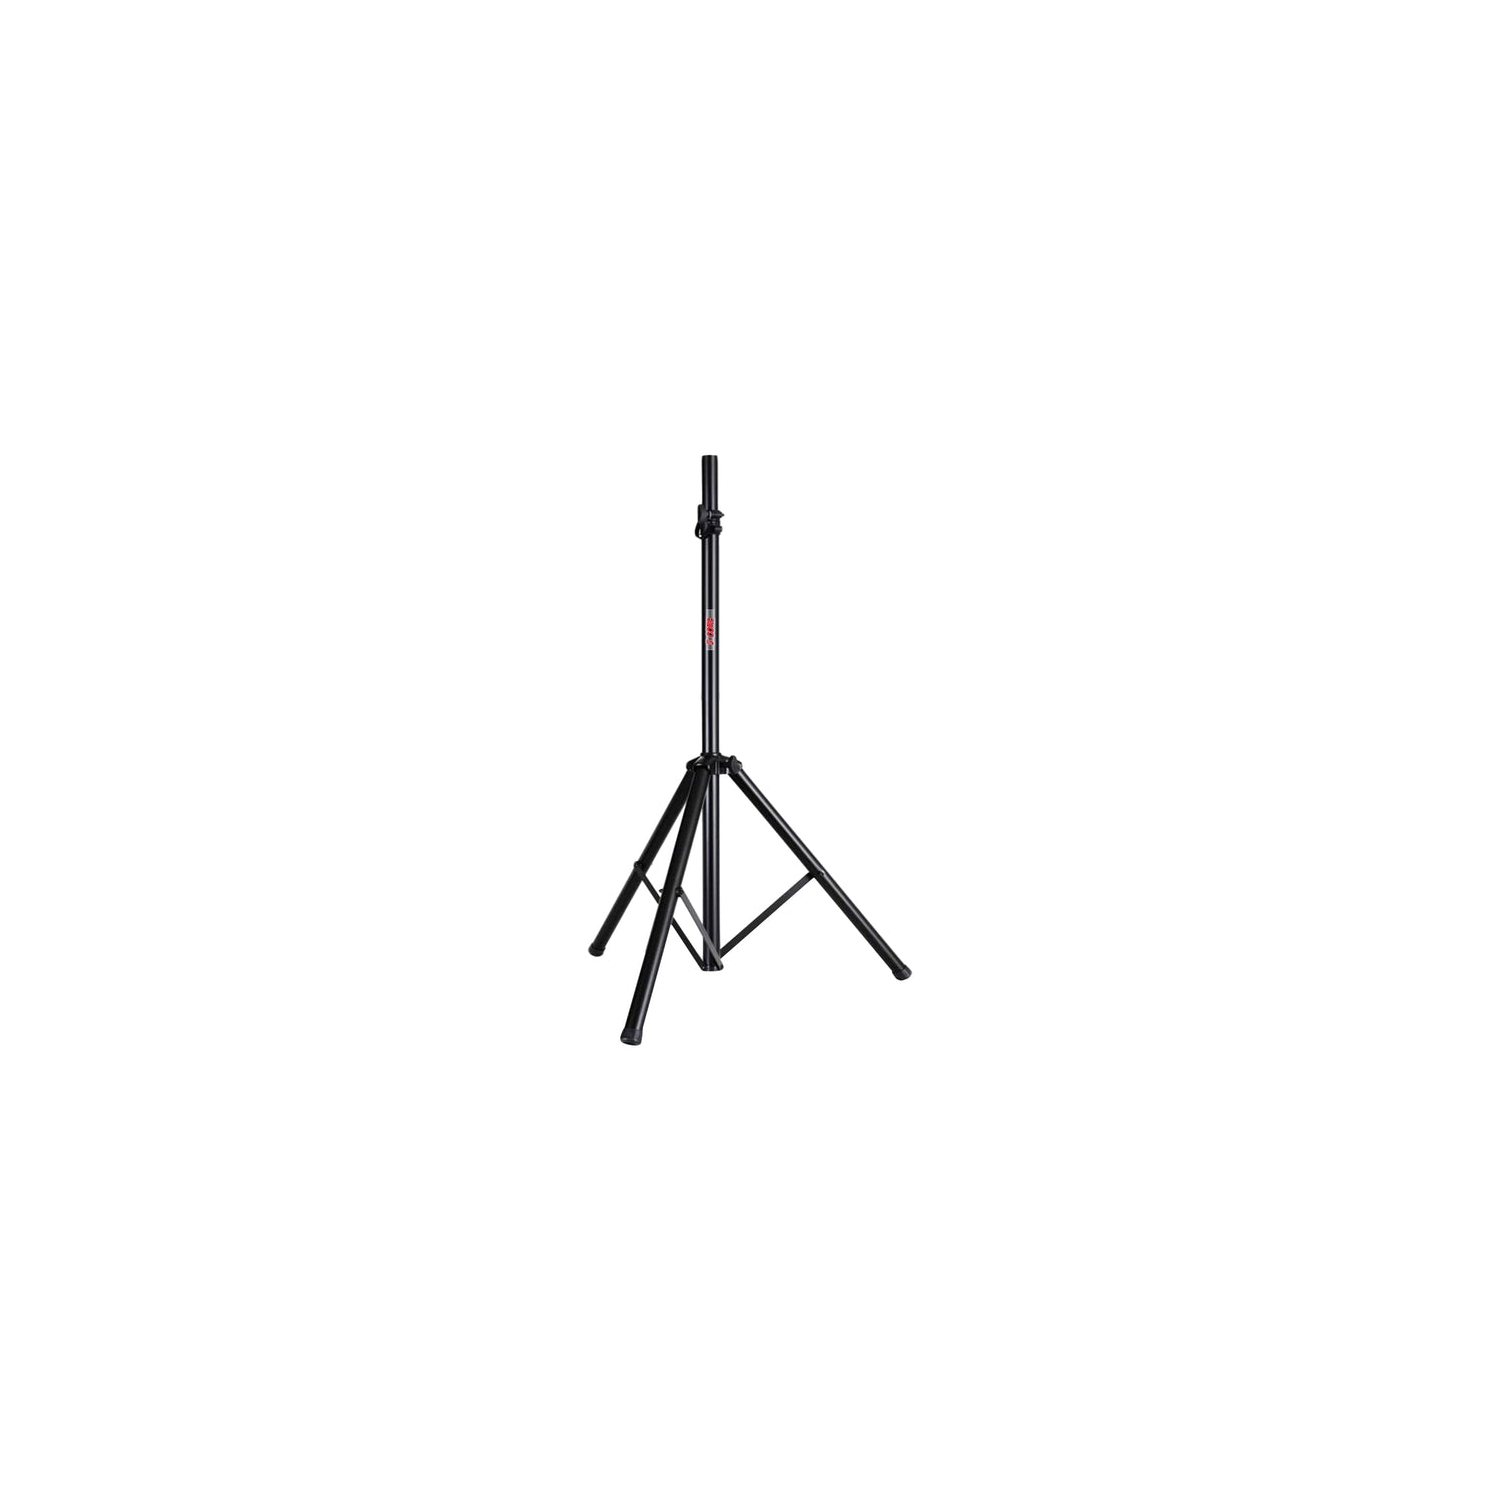 5 Core Speakers Stands 1 Piece Black Heavy Duty Height Adjustable Tripod PA Monitor Holder for Large Speakers DJ Stand Para Bocinas -SS HD 1PK BLK WOB